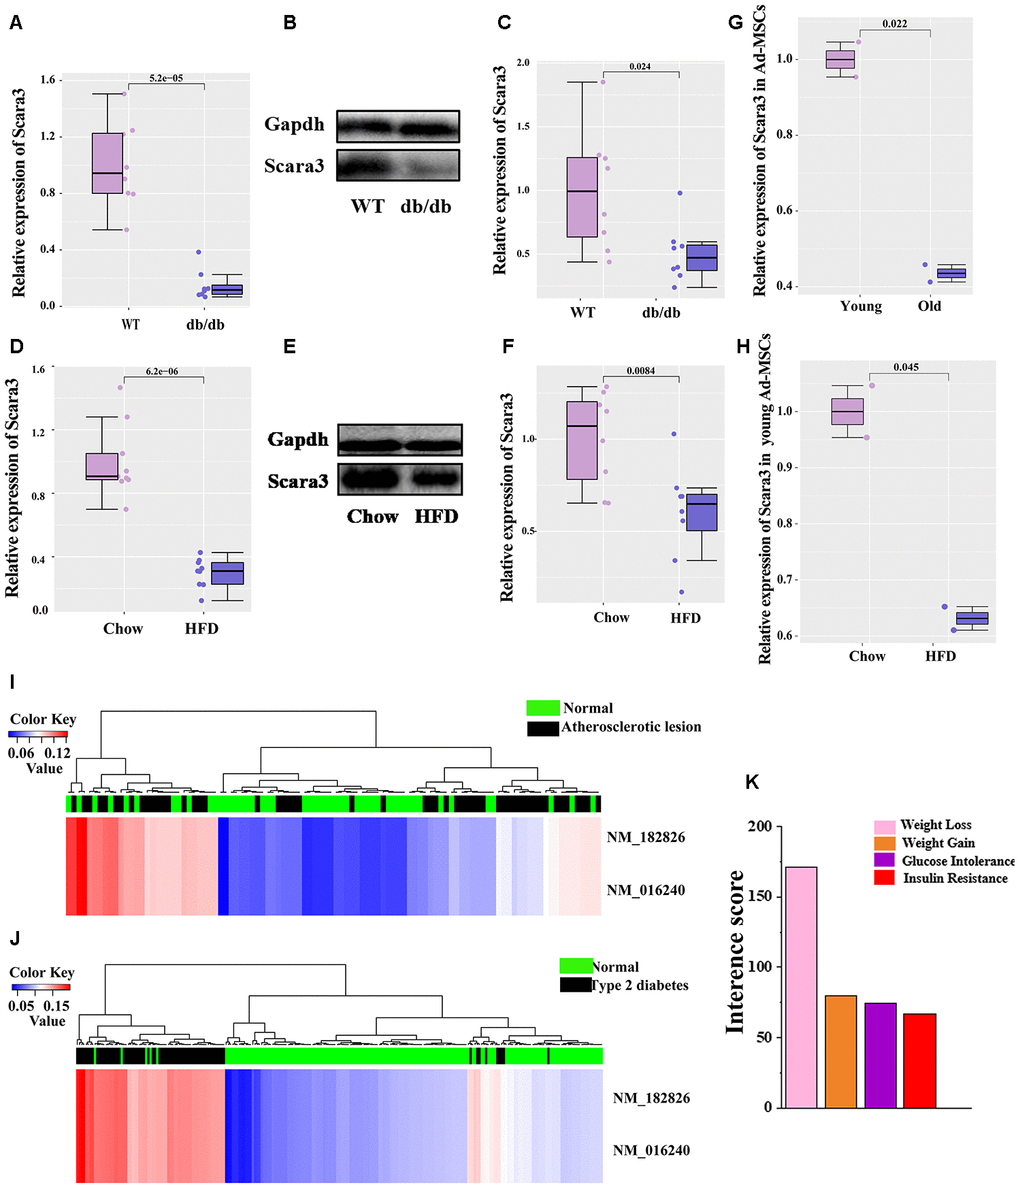 Phenotypical traits of SCARA3. (A) mRNA expression of Scara3 in iWAT of db/db mice. 8 mice were included in each group. (B, C) Protein expression of Scara3 in iWAT of db/db mice. 8 mice were included in in each group. (D) mRNA expression of Scara3 in iWAT of mice fed by HFD. 9 mice were included in each group. (E, F) Protein expression of Scara3 in iWAT of mice fed by HFD. 8 mice were included in each group. (G) Expression of Scara3 in white adipose tissue-derived mesenchymal stem cells (Ad-MSCs) of young and old mice. Each group has 2 mice, respectively. Data were obtained from GEO database (GSE115068). (H) Expression of Scara3 in Ad-MSCs of young mice fed a HFD. Each group has 2 mice, respectively. Data were obtained from GEO database (GSE115068). (I, J) Methylation of SCARA3 in metabolic disorders, including atherosclerotic lesions (I) and type 2 diabetes (J). (K) Relationship of weight-associated diseases with SCARA3 via a curated chemical interaction, based on the CTD database.